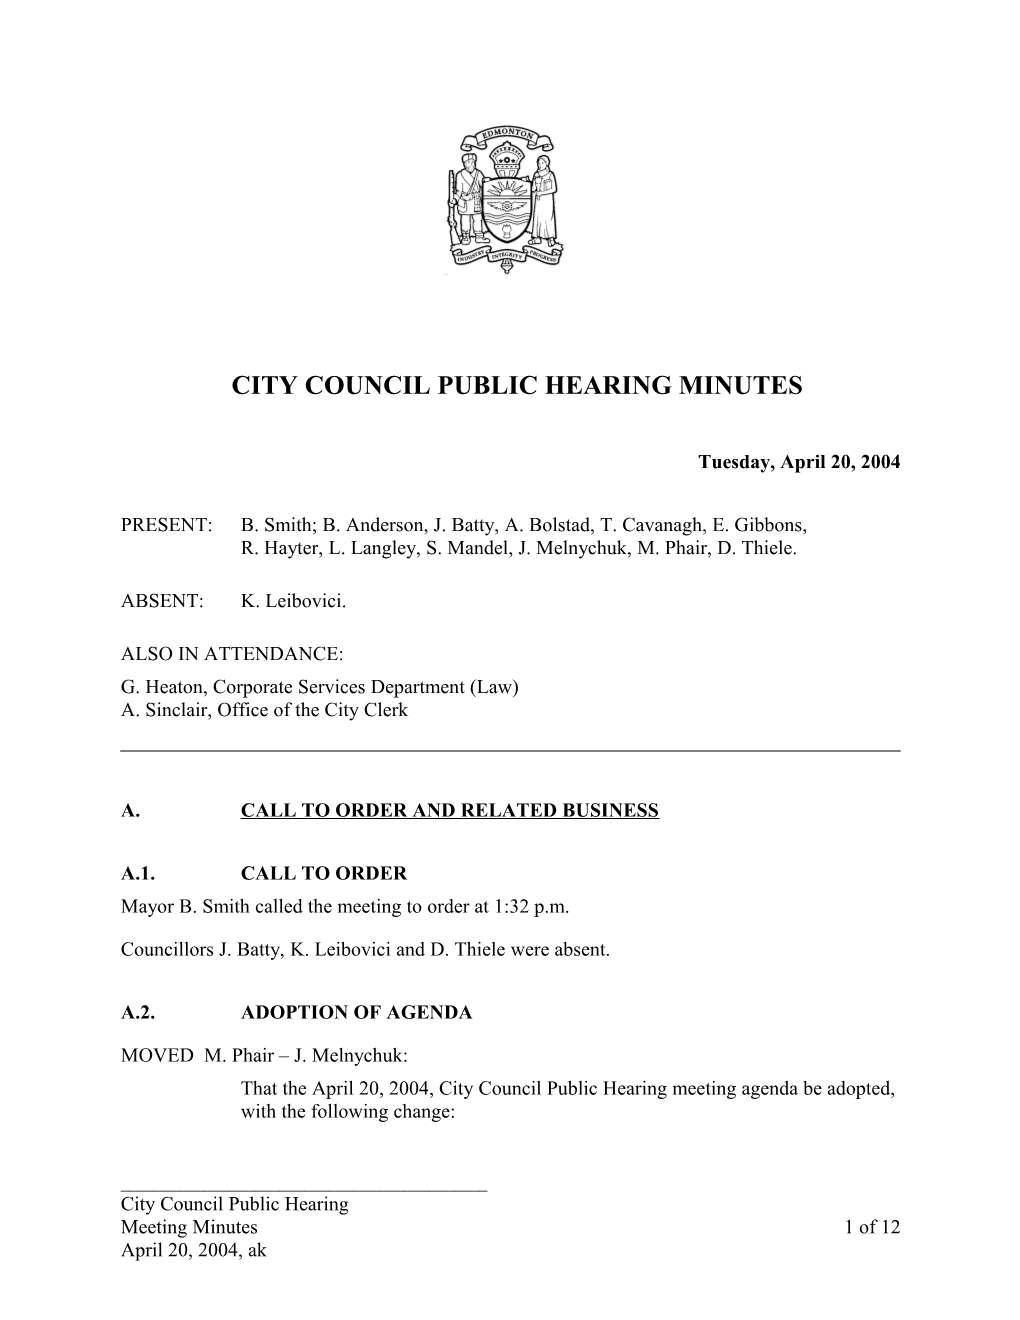 Minutes for City Council April 20, 2004 Meeting